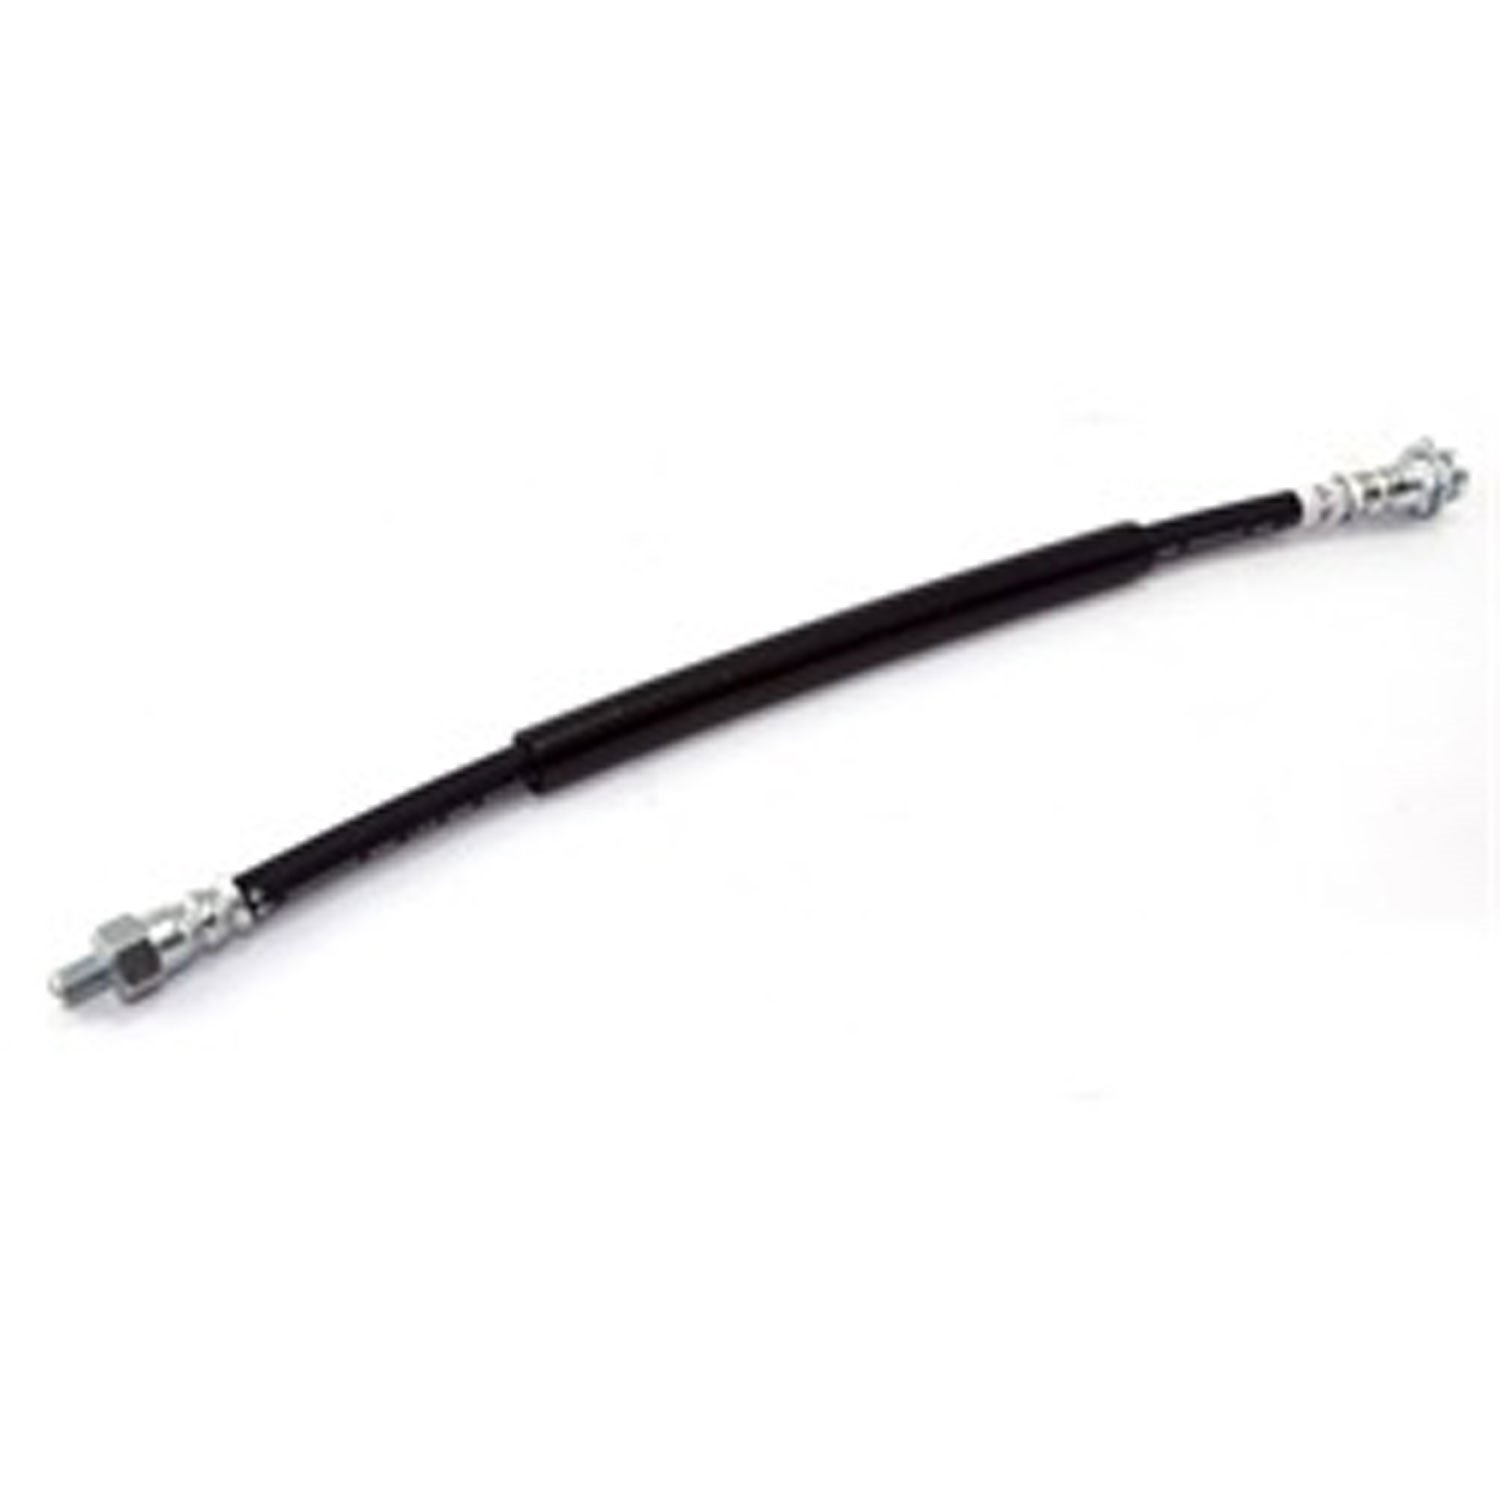 Replacement front brake hose from Omix-ADA, Fits 76-78 Jeep CJ7.